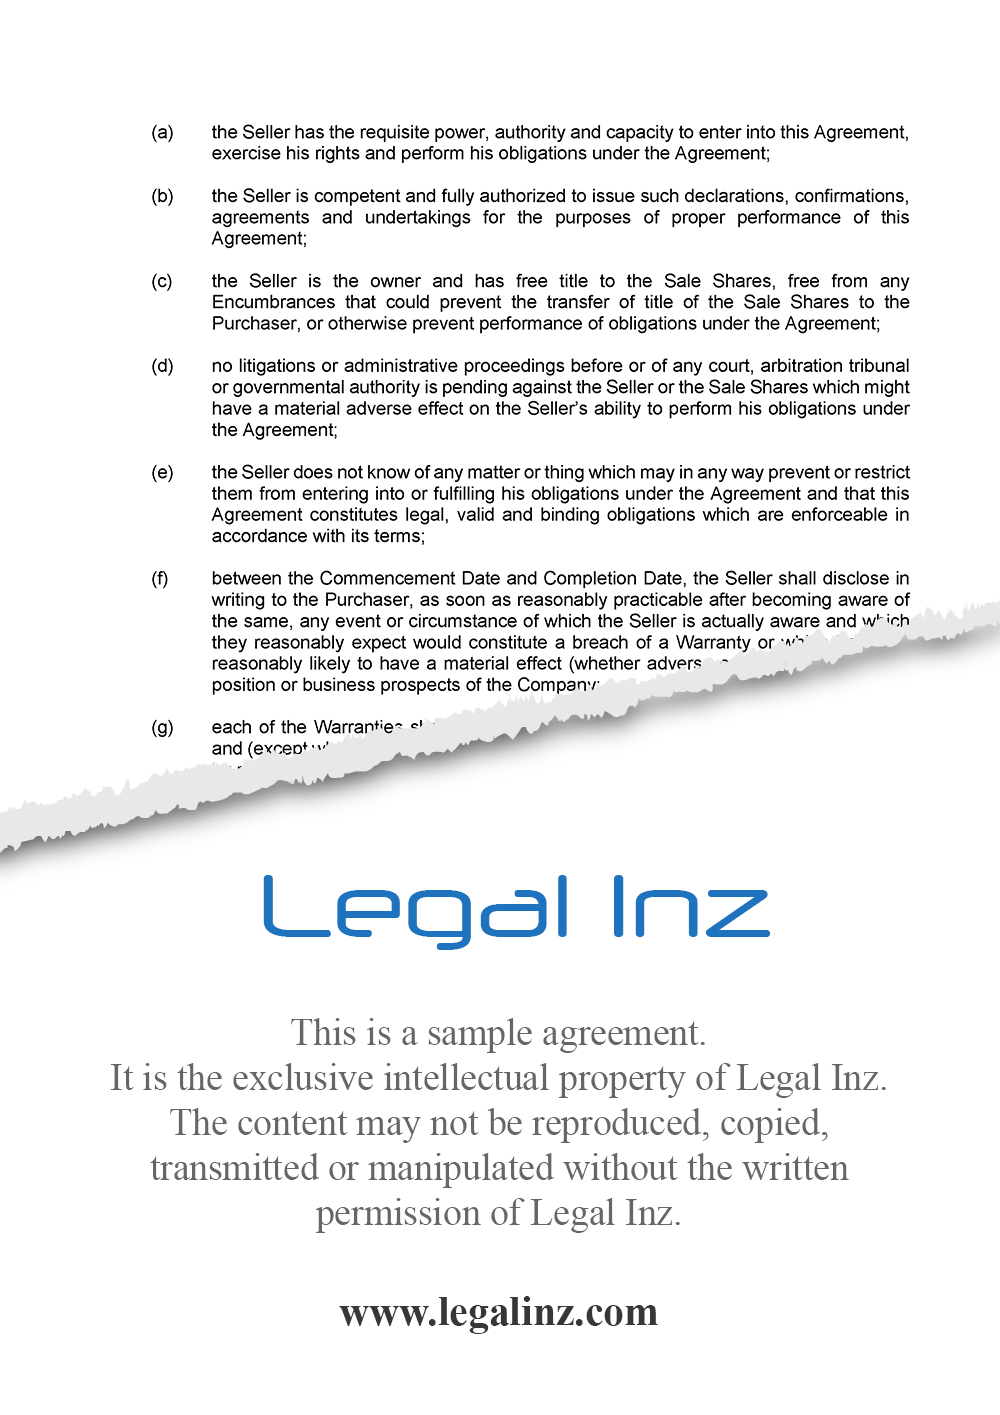 Share Purchase Agreement Sample 6